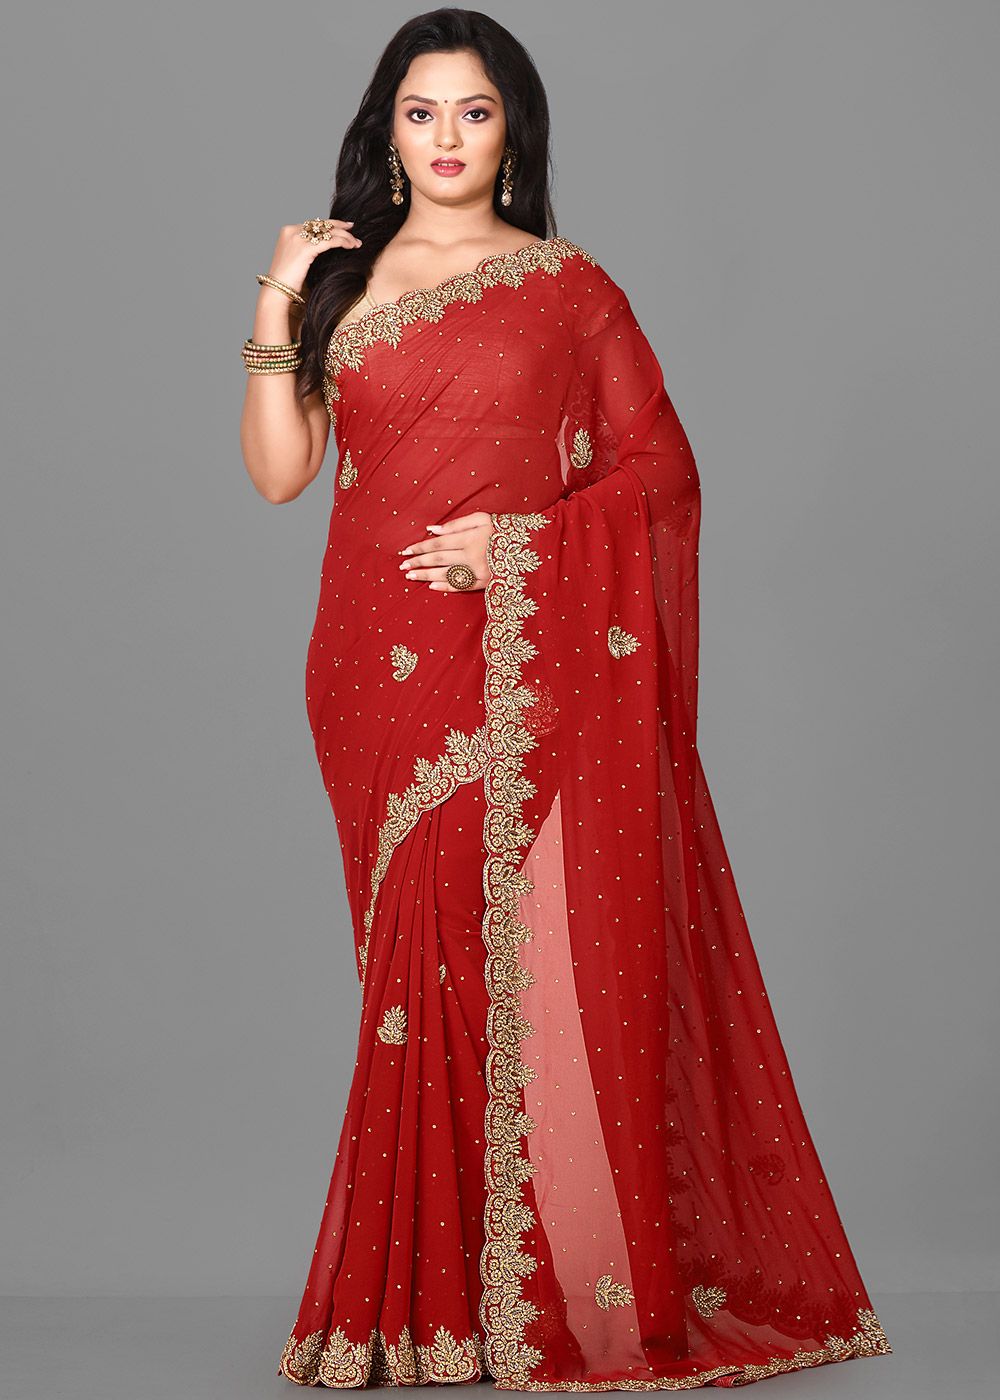 Red color Georgette seuence work saree - New In - Indian